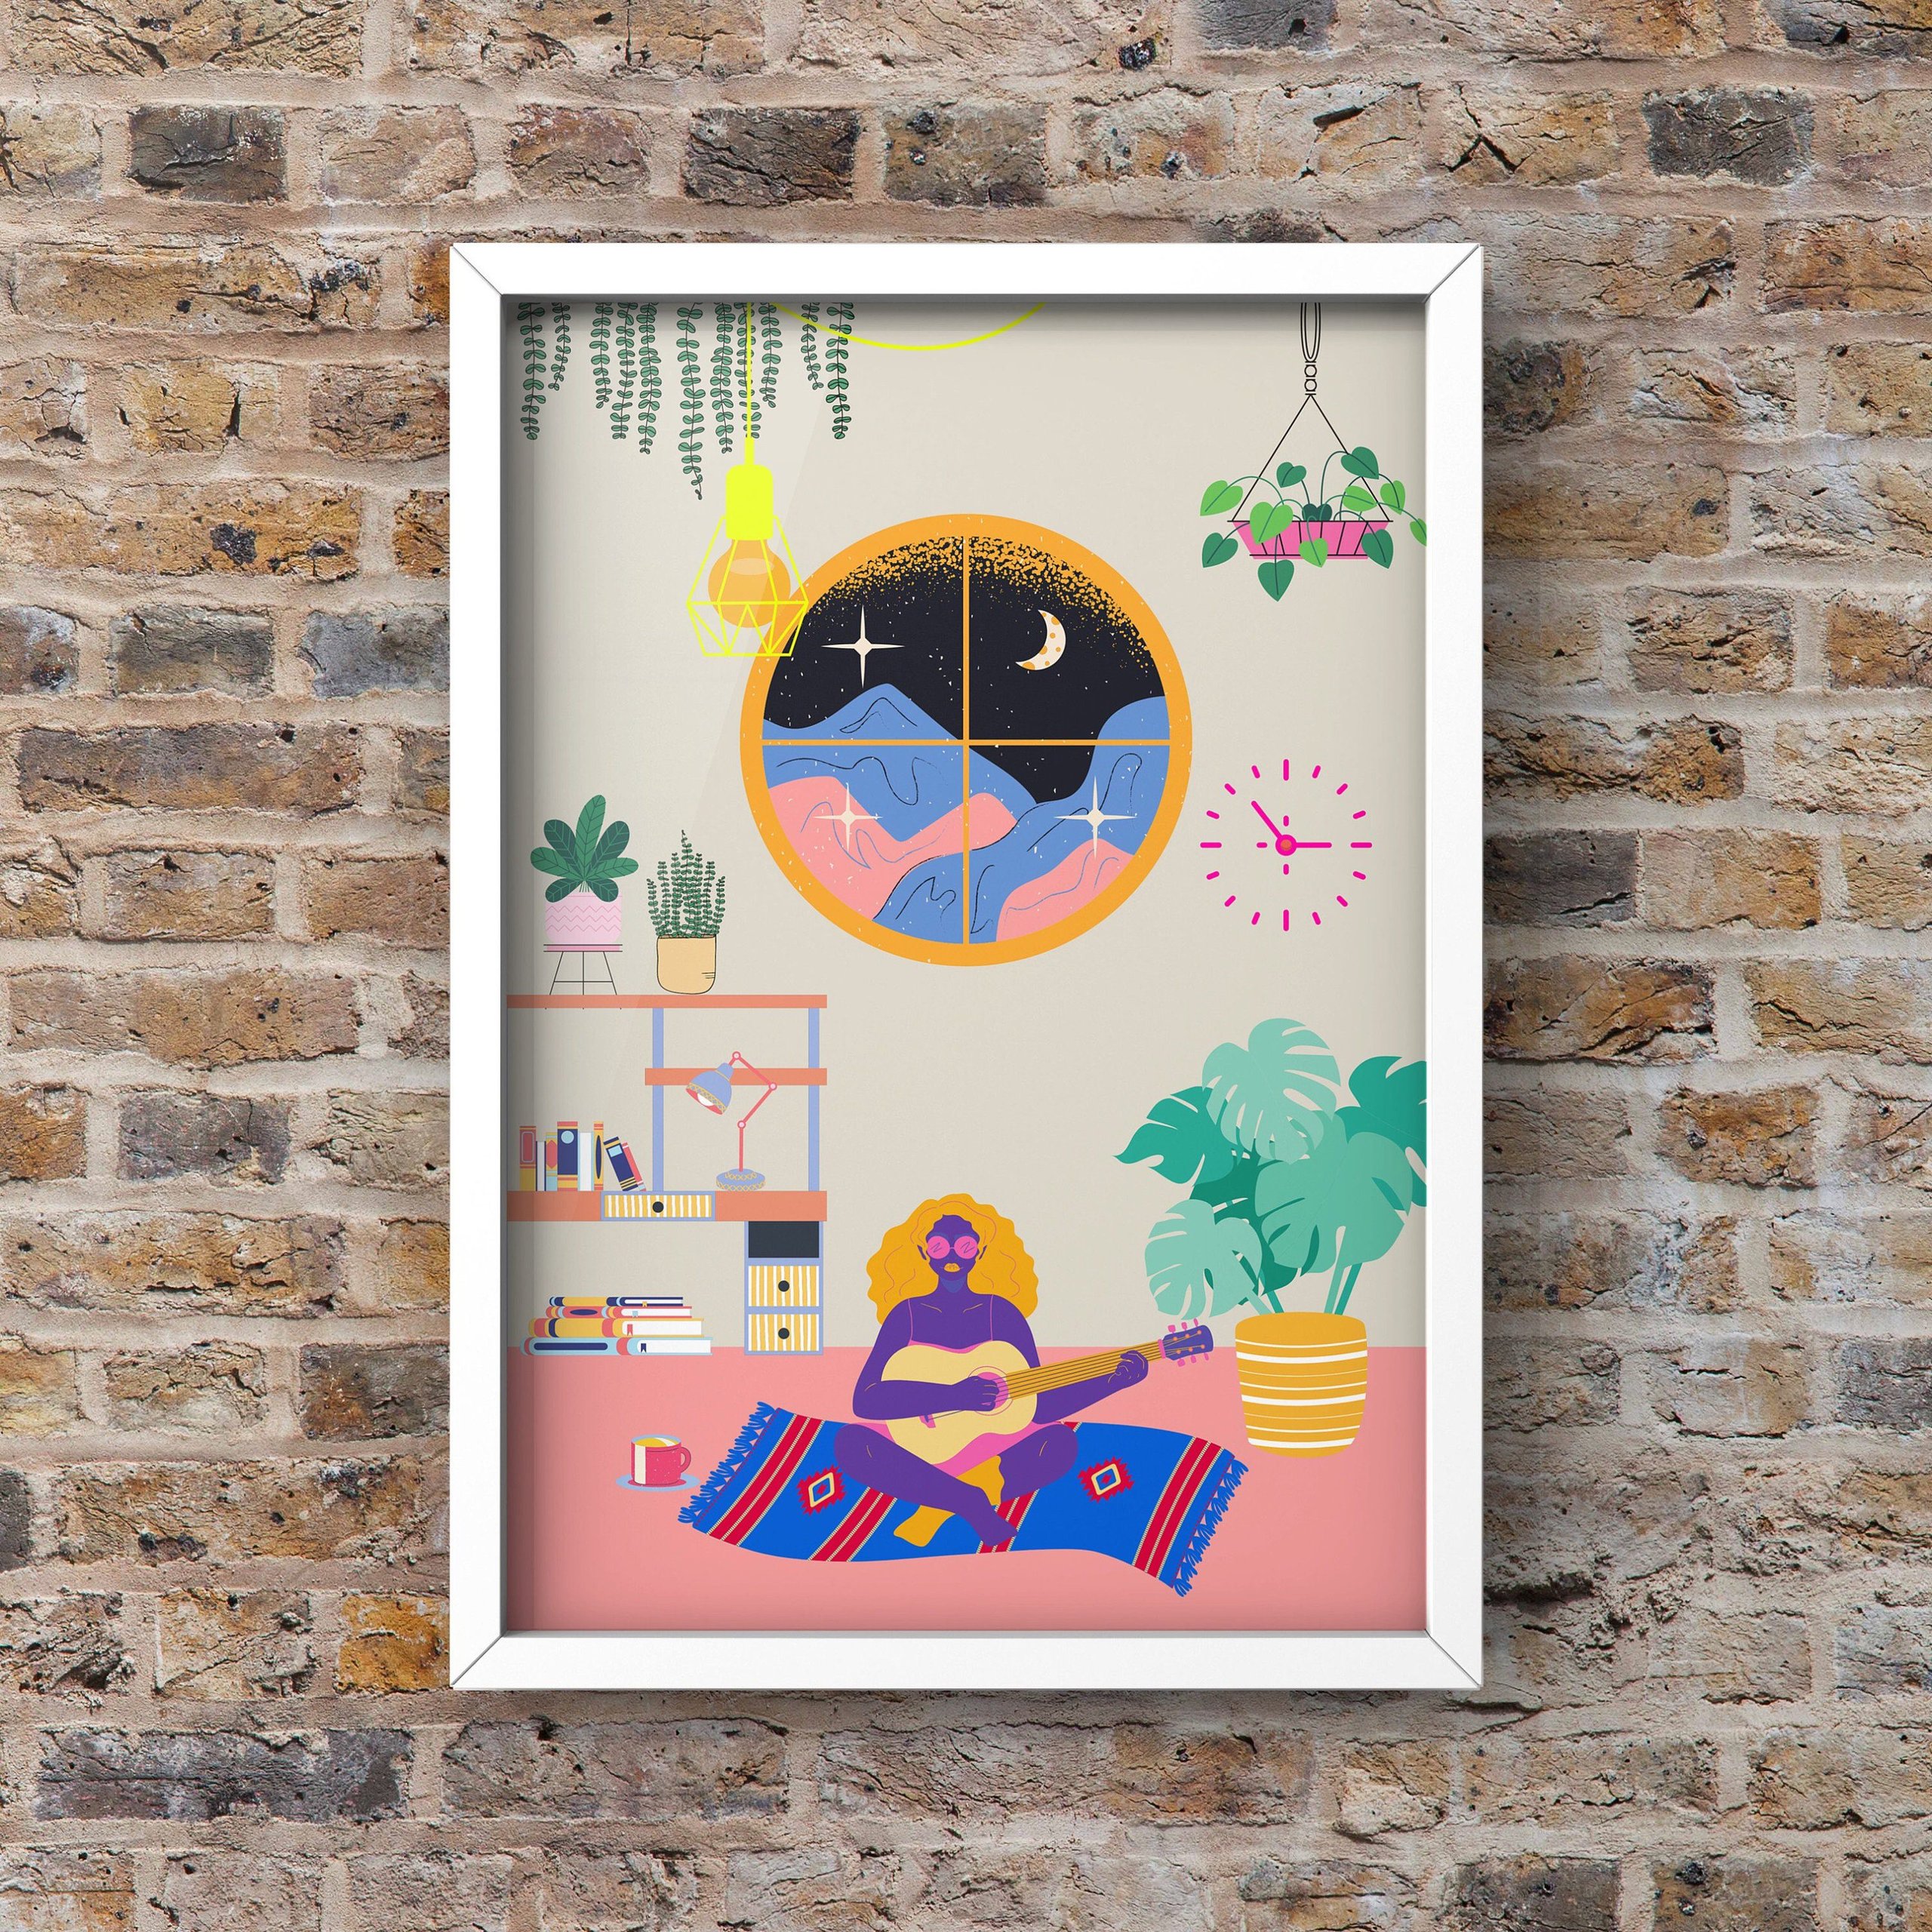 Paradise House: Chillout Room A4/A3 Print Wall Art